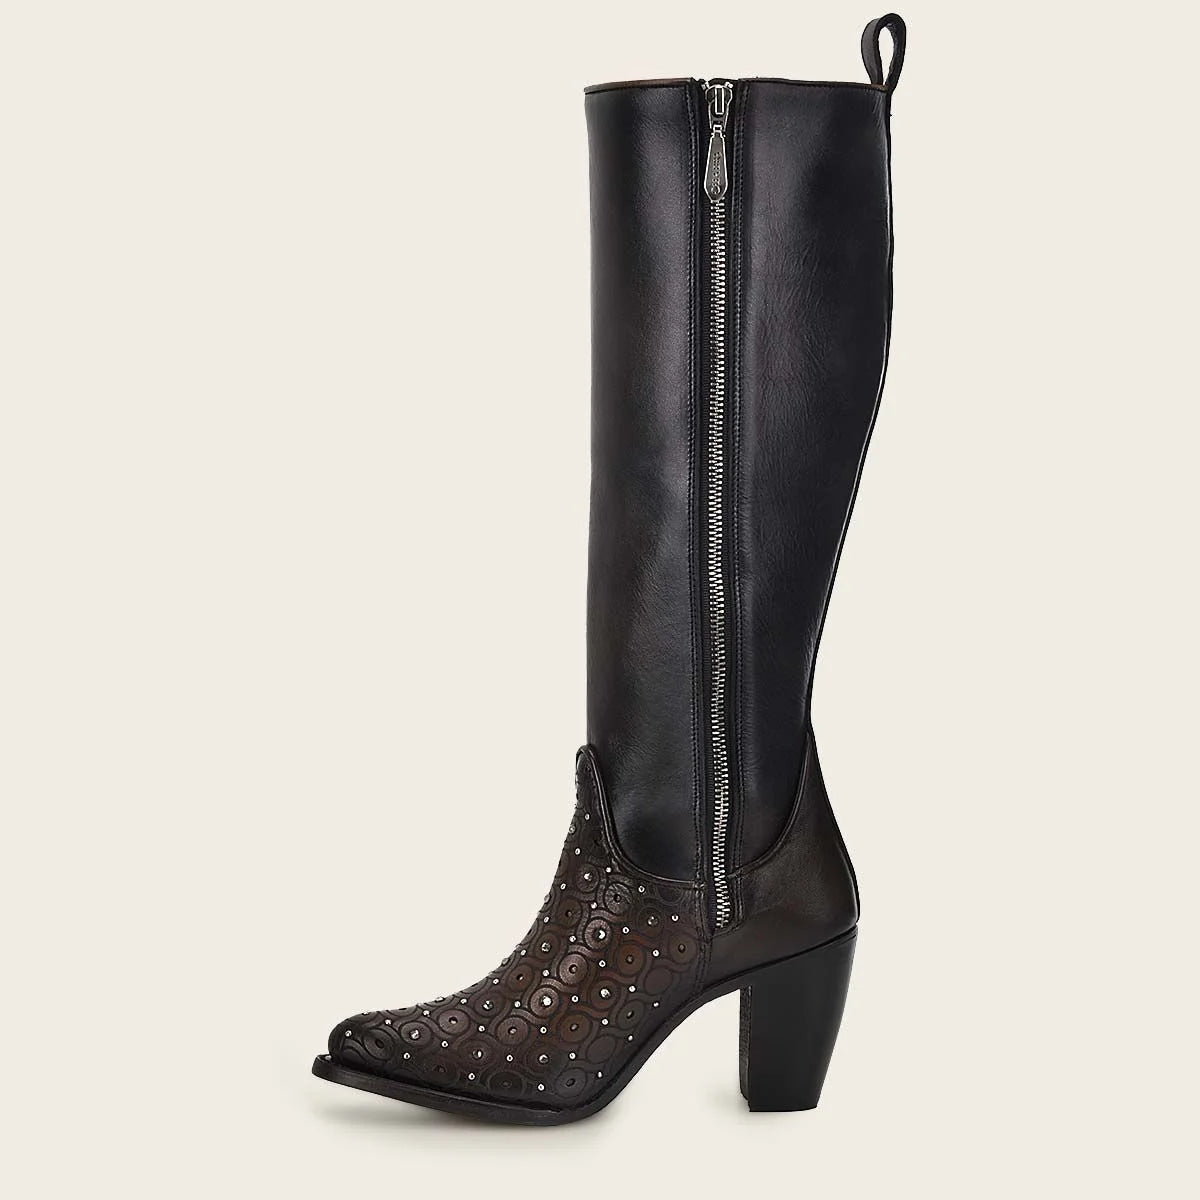 3F0BRS - Cuadra chocolate studded tall boots for women